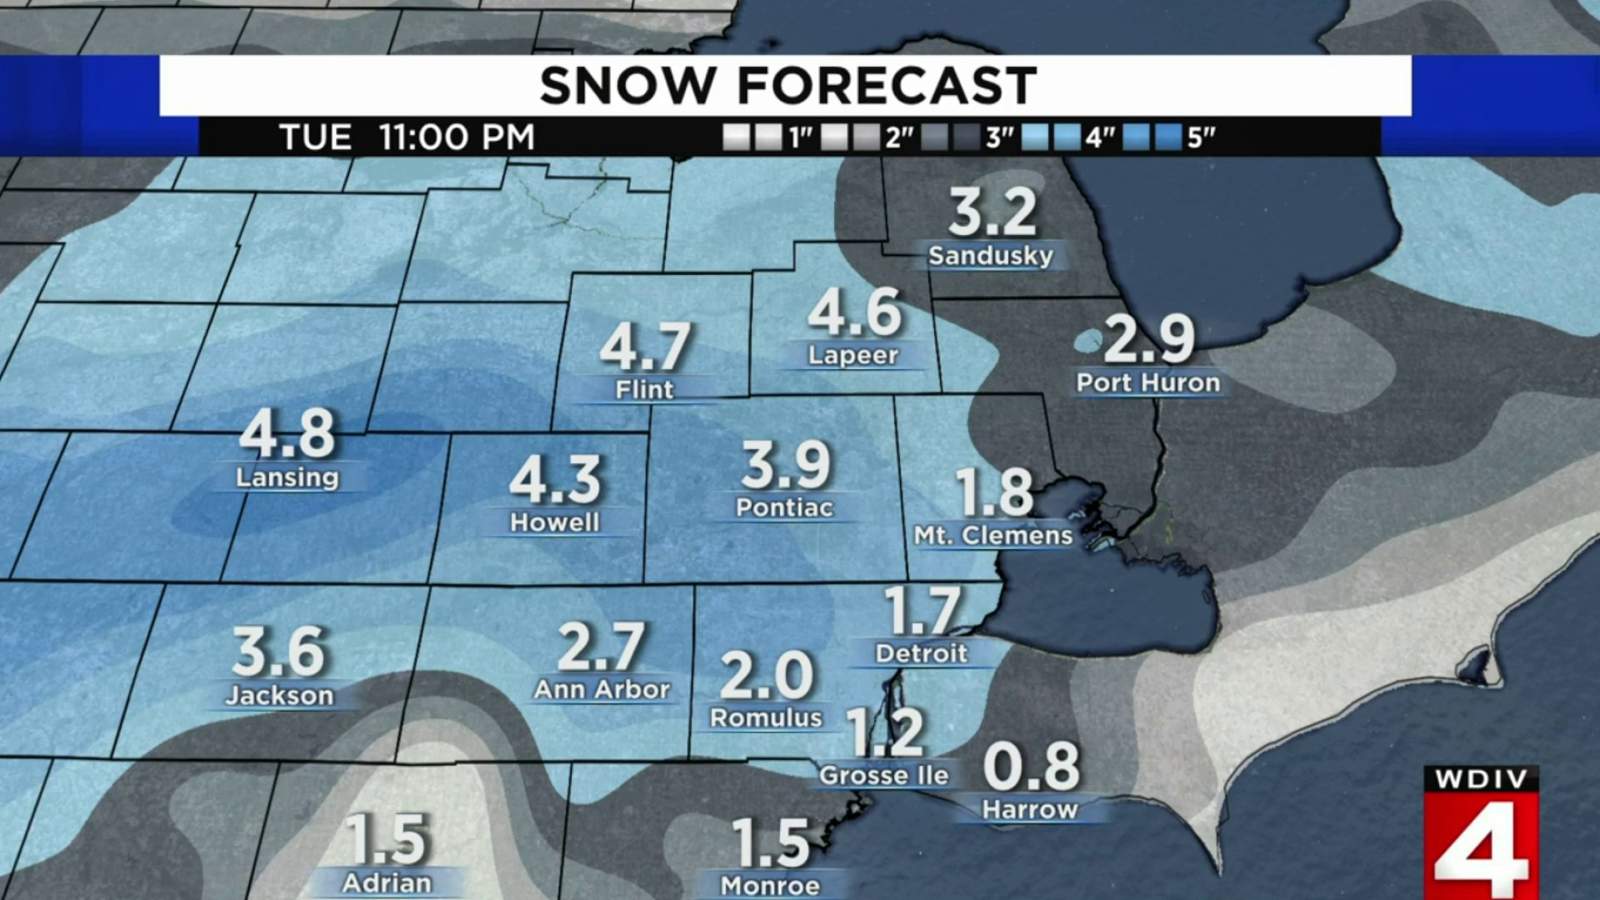 More snow tonight – here’s what to expect